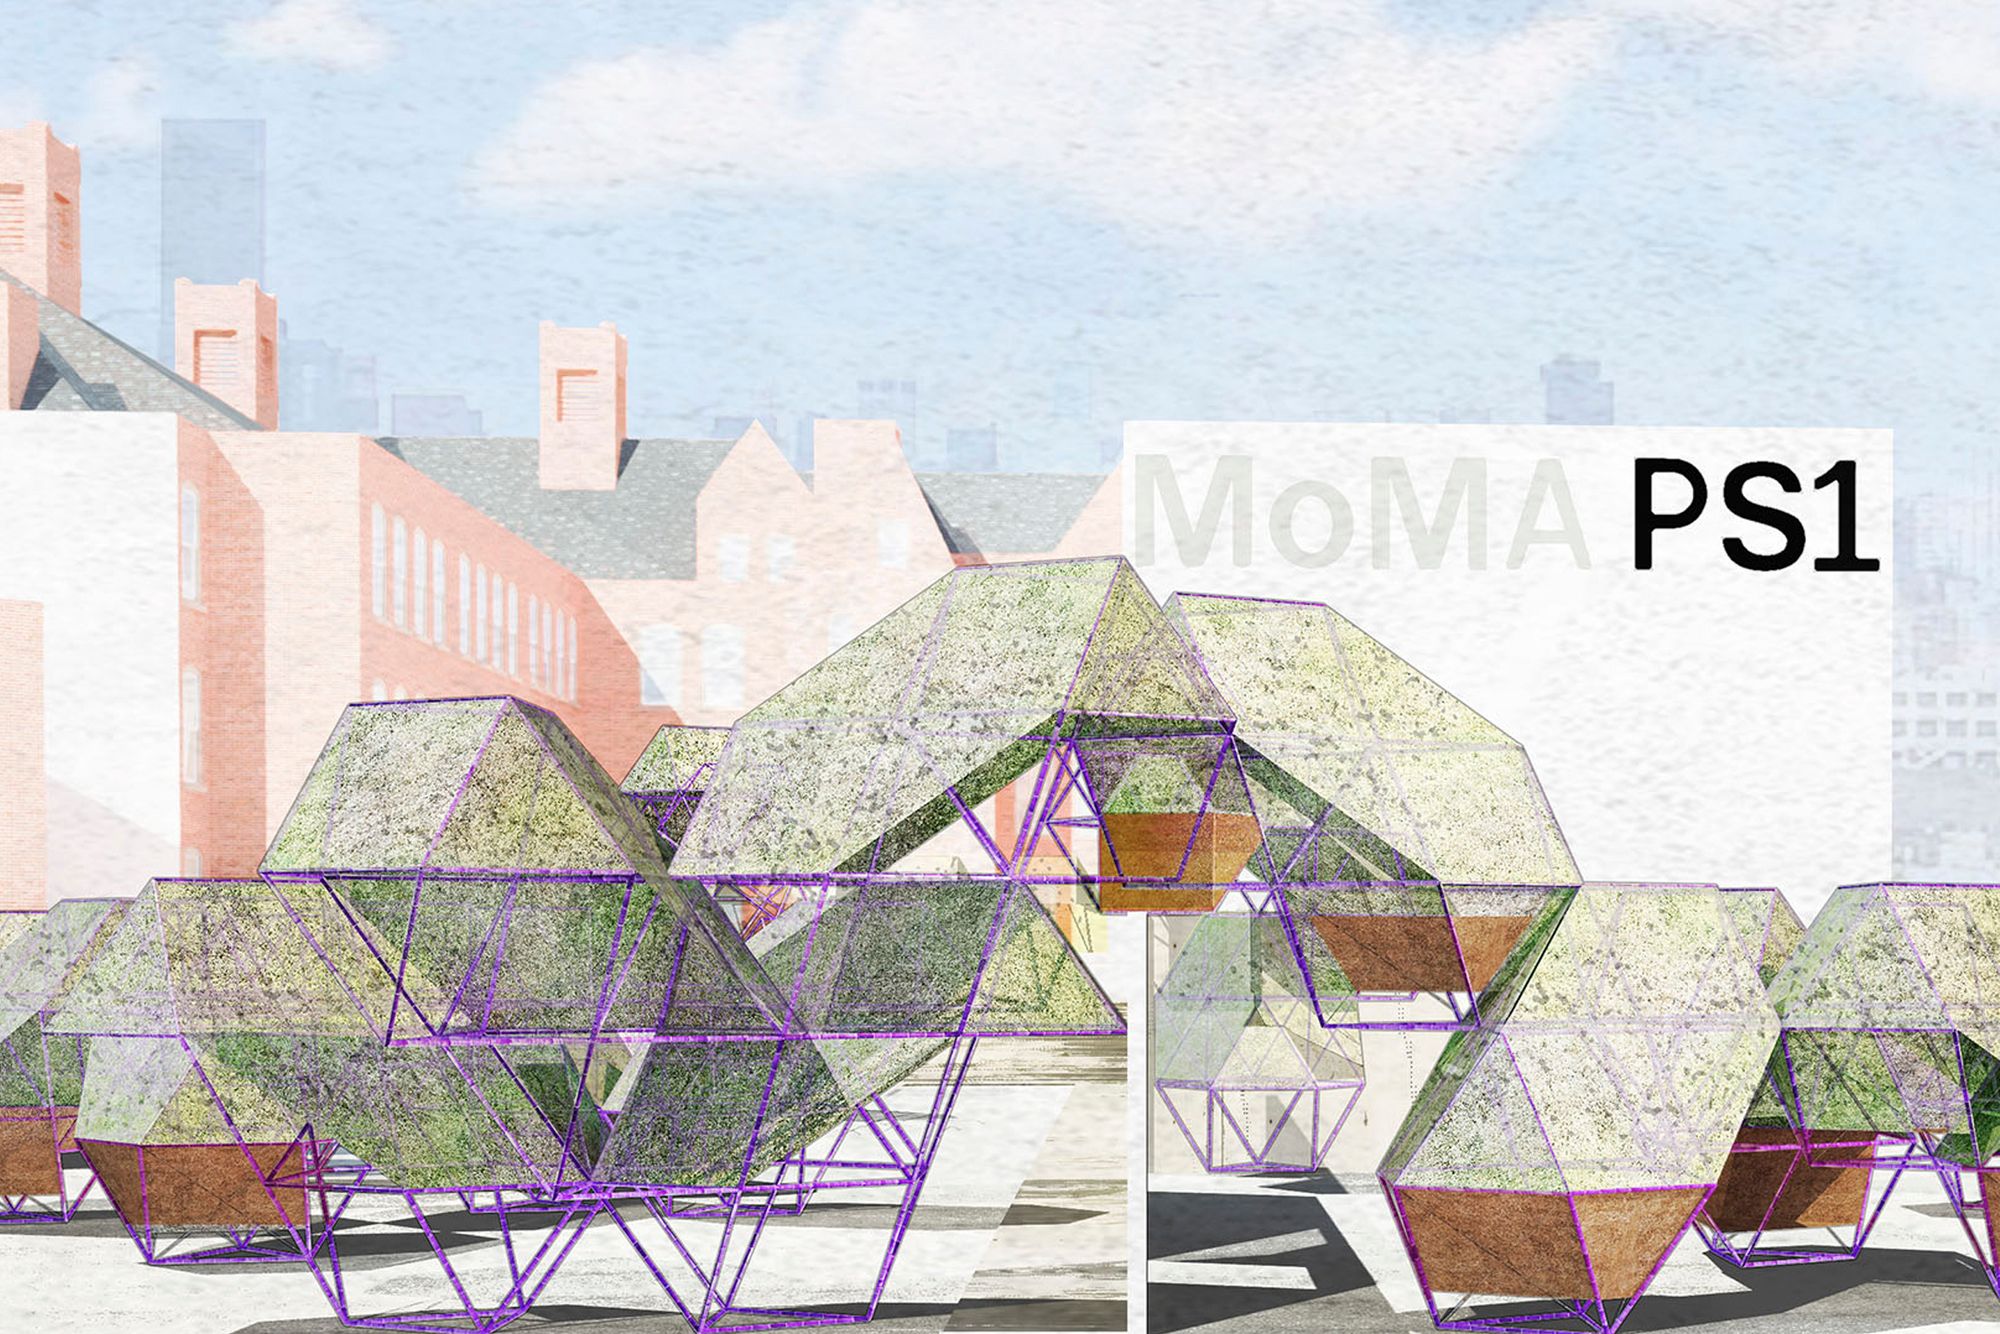 MoMA PS1 YAP